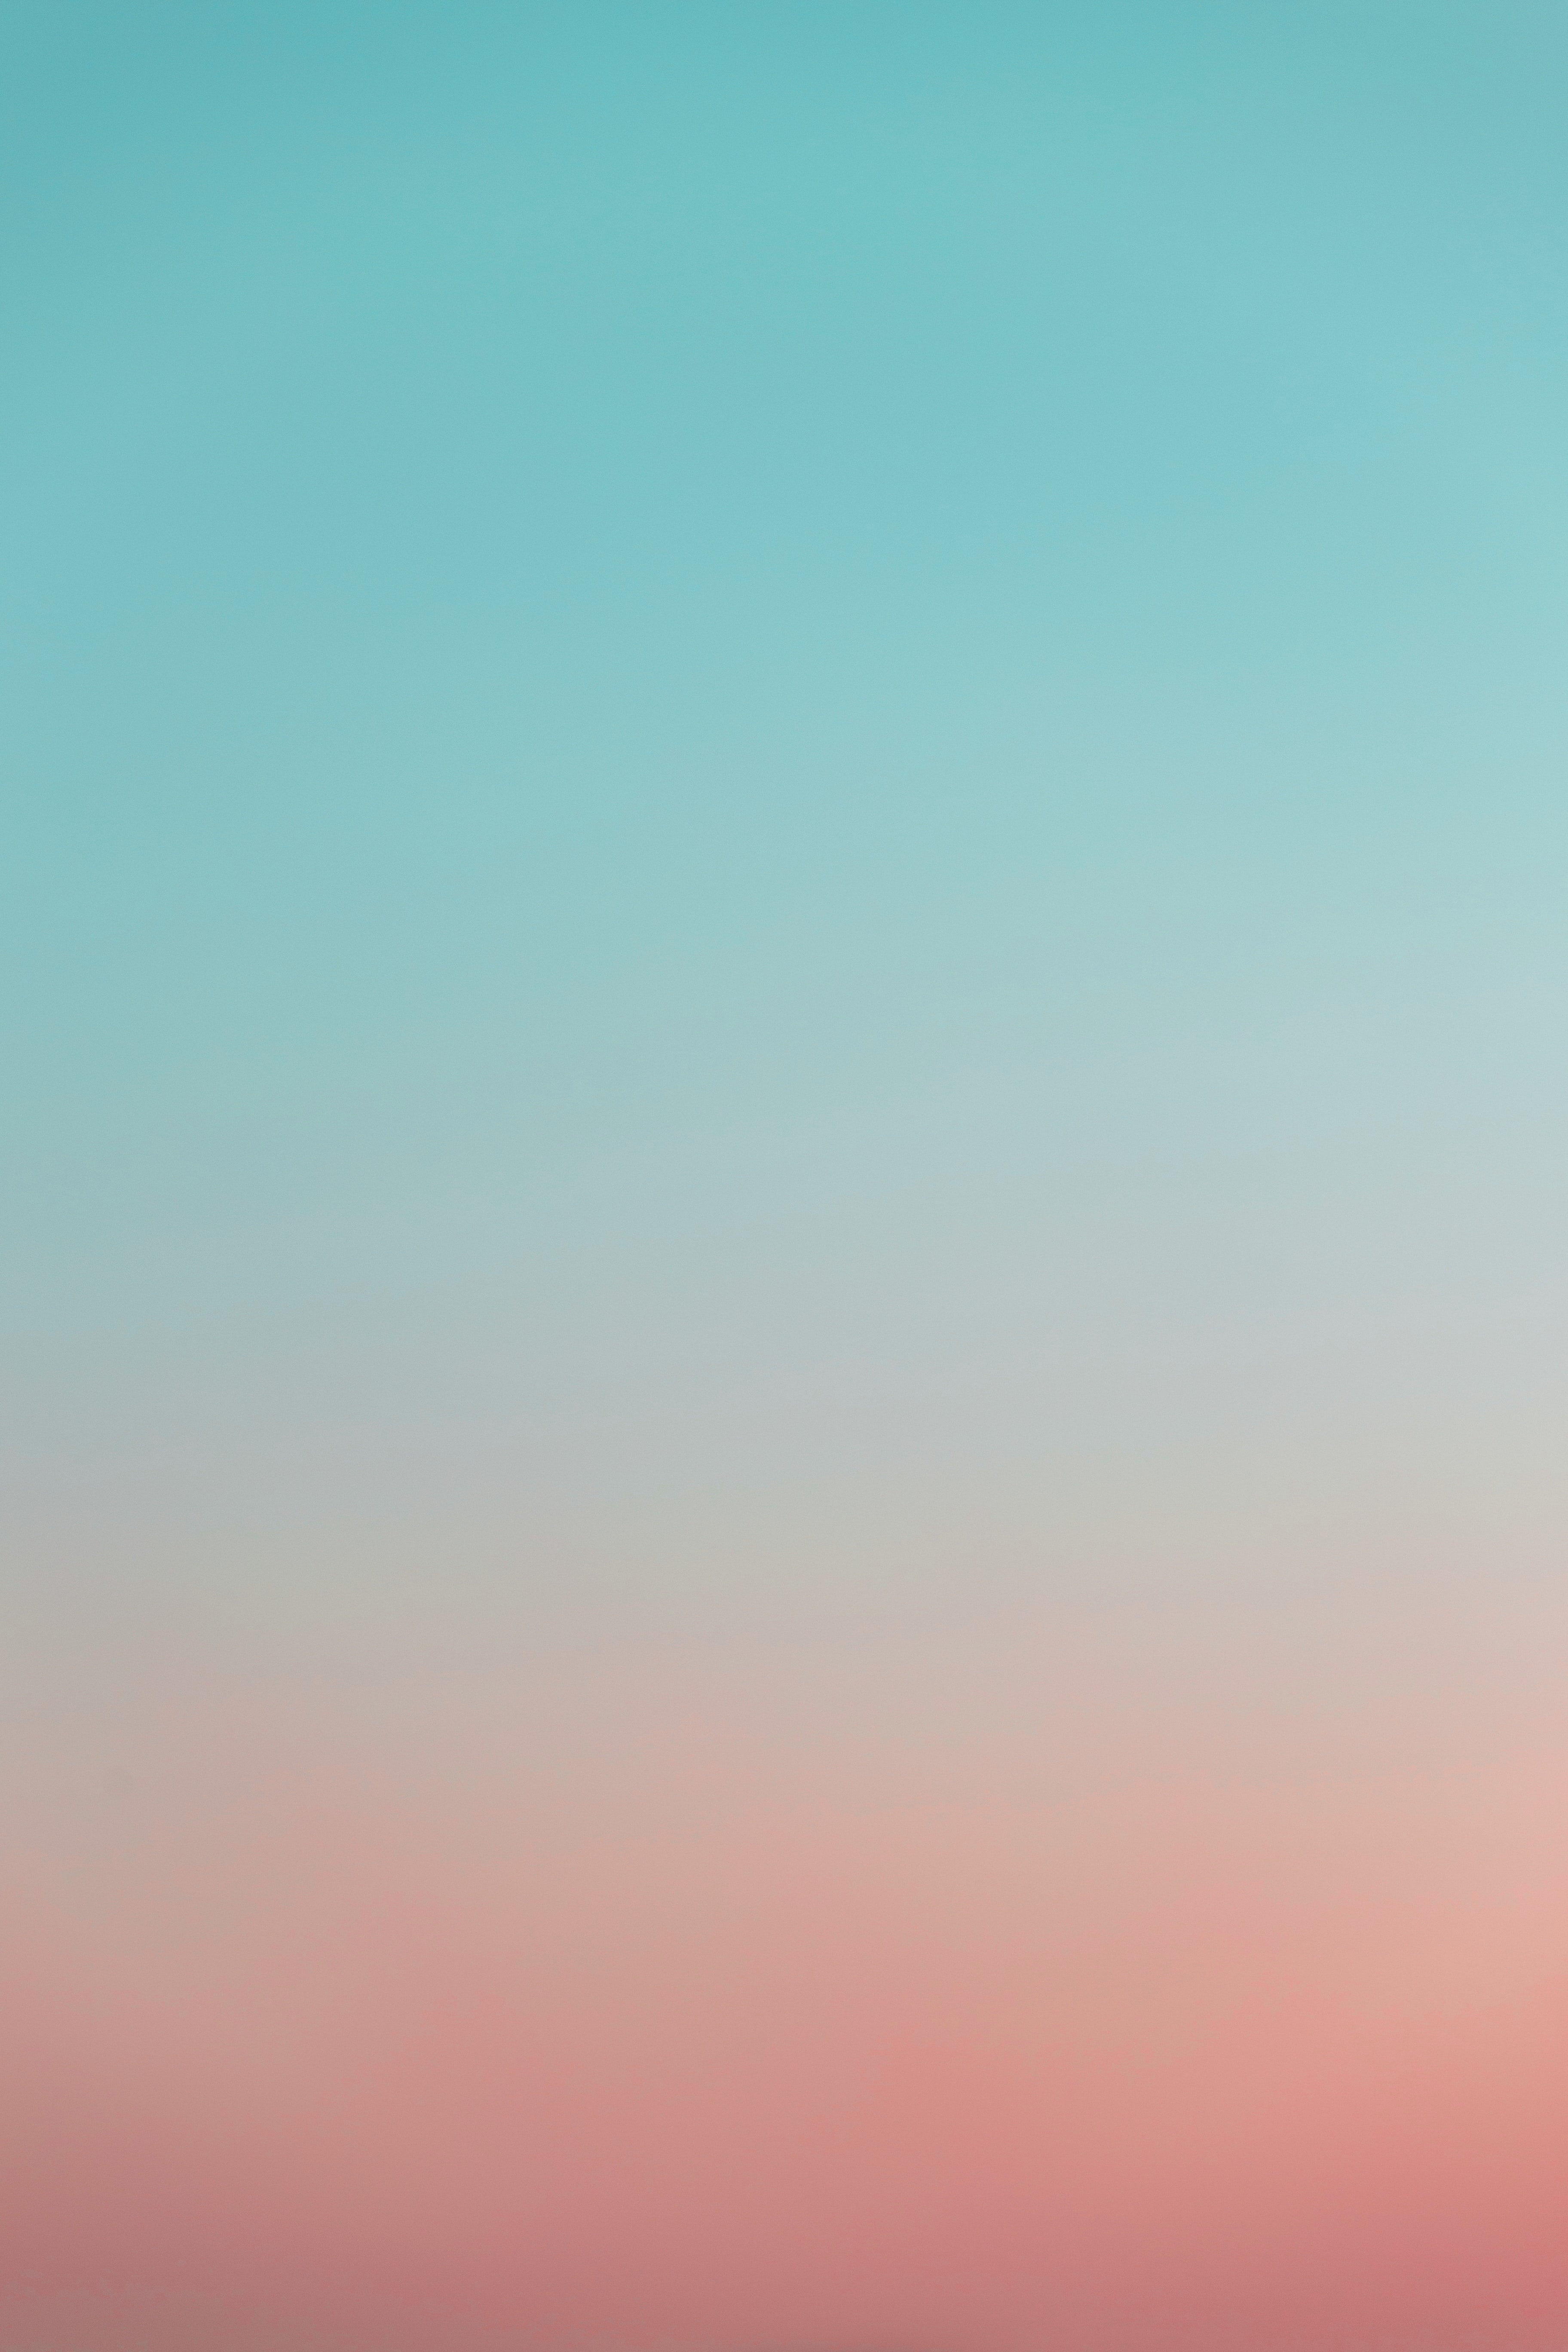 pink, abstract, blue, color, gradient